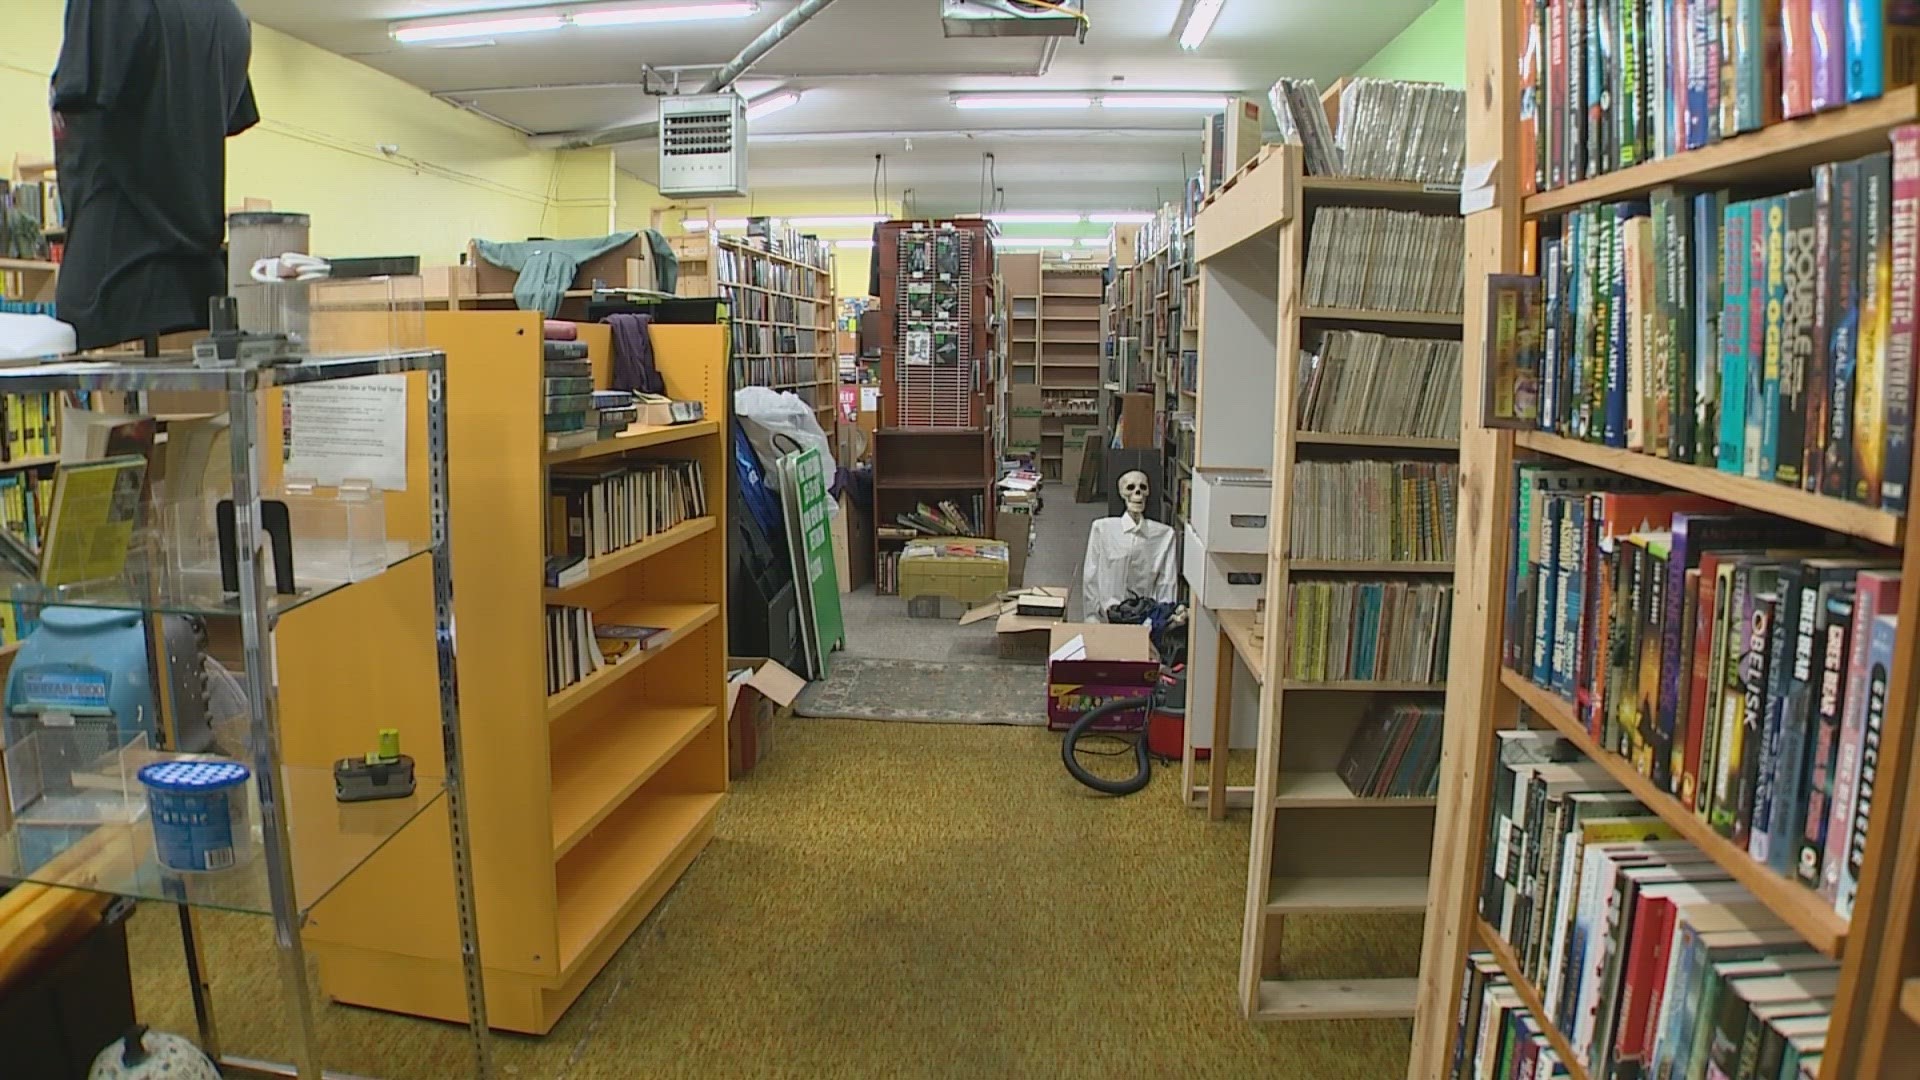 More than $8,000 worth of books and other products were destroyed in the flood.